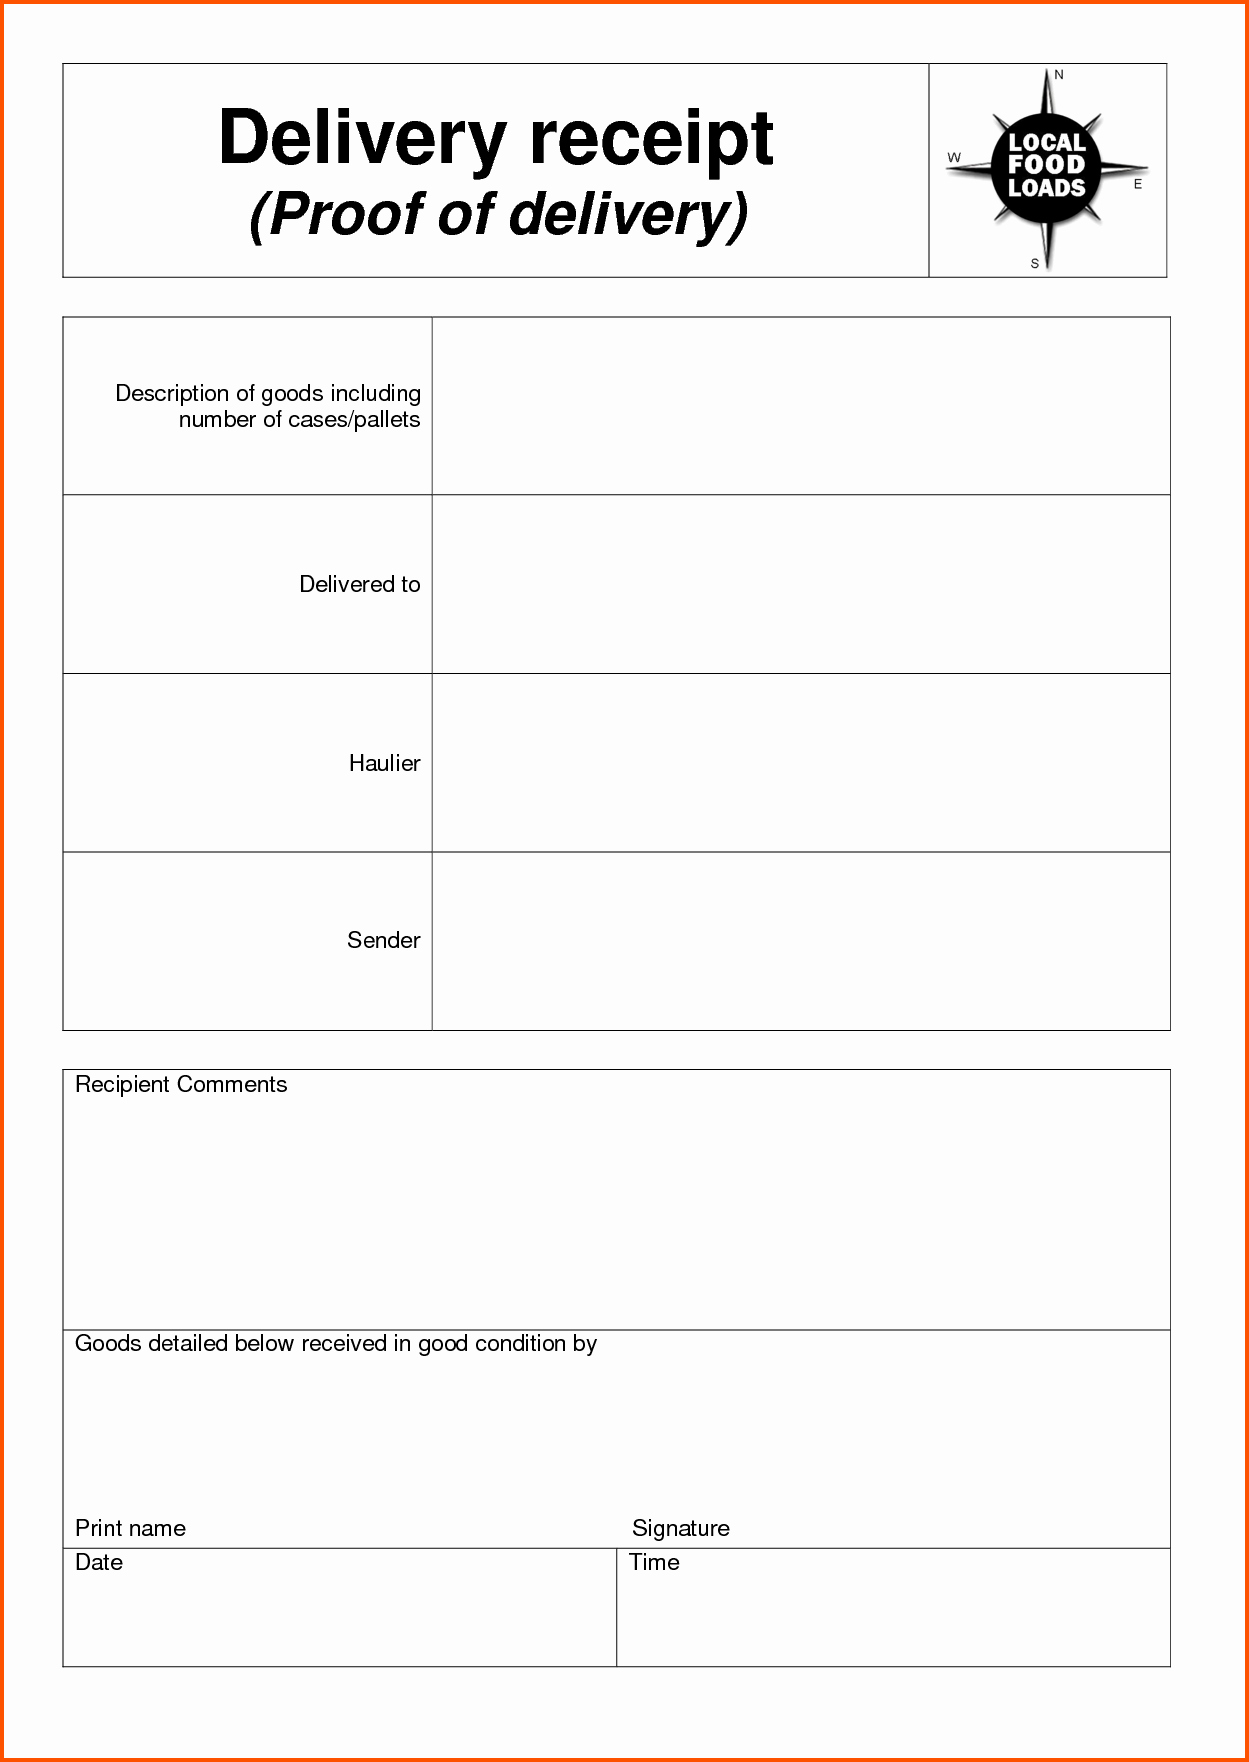 Receipt Of Goods Template Best Of 7 Delivery Receipt Template Ideas Receipt Goods